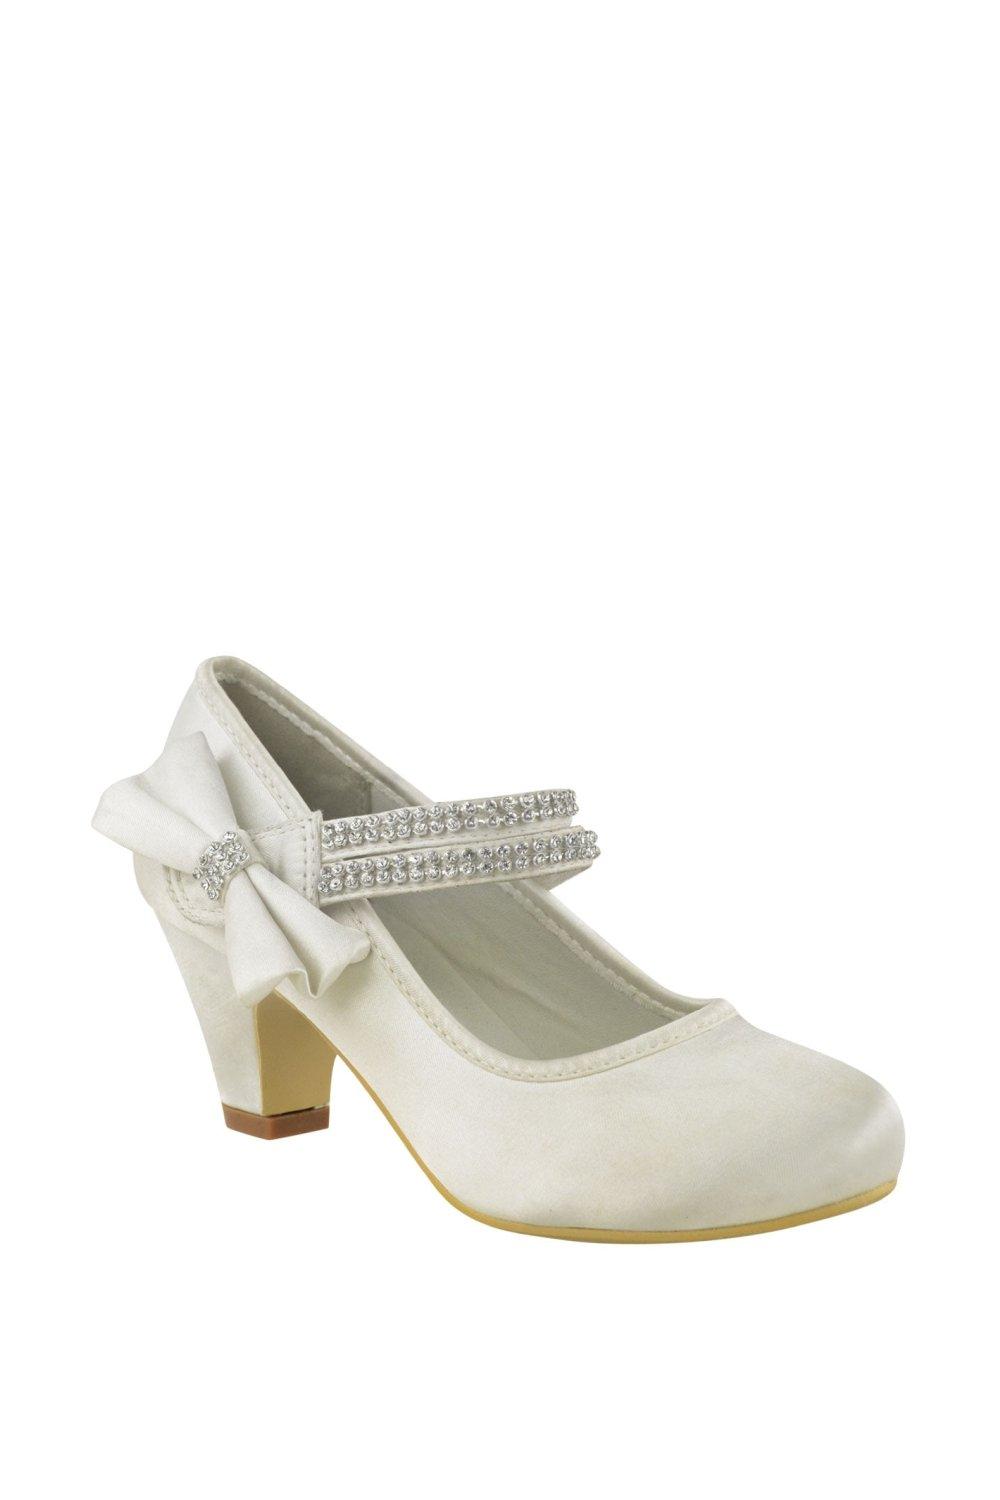 ’Adla’ Mid High Heel Court Shoes With Double Diamante Strap